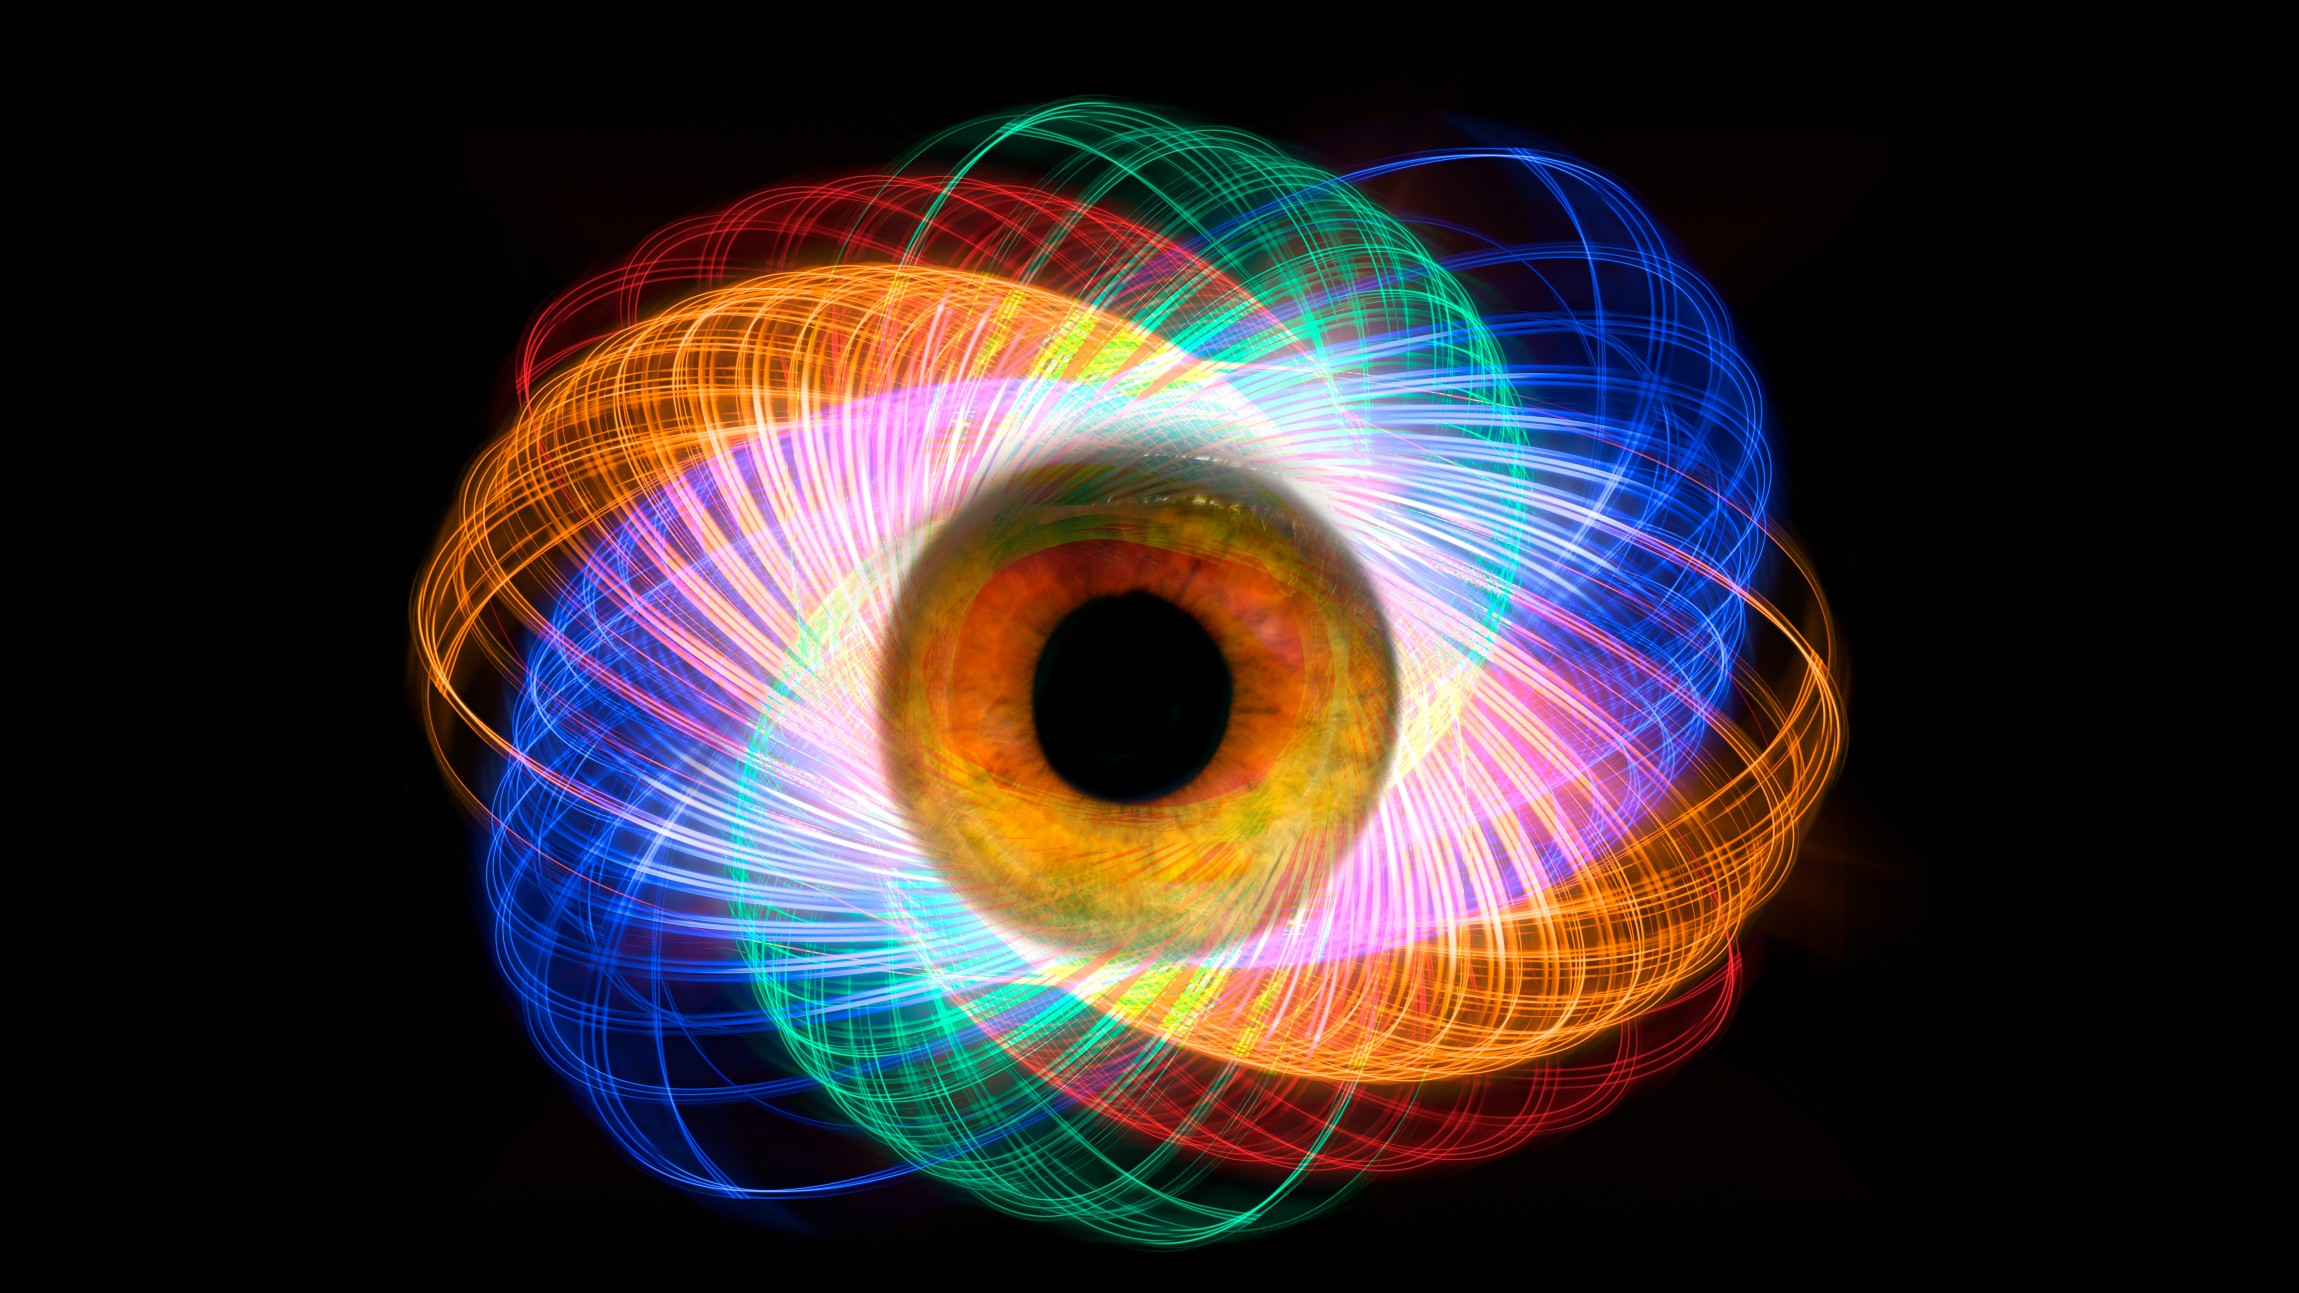 Light pattern as rings are a black hole